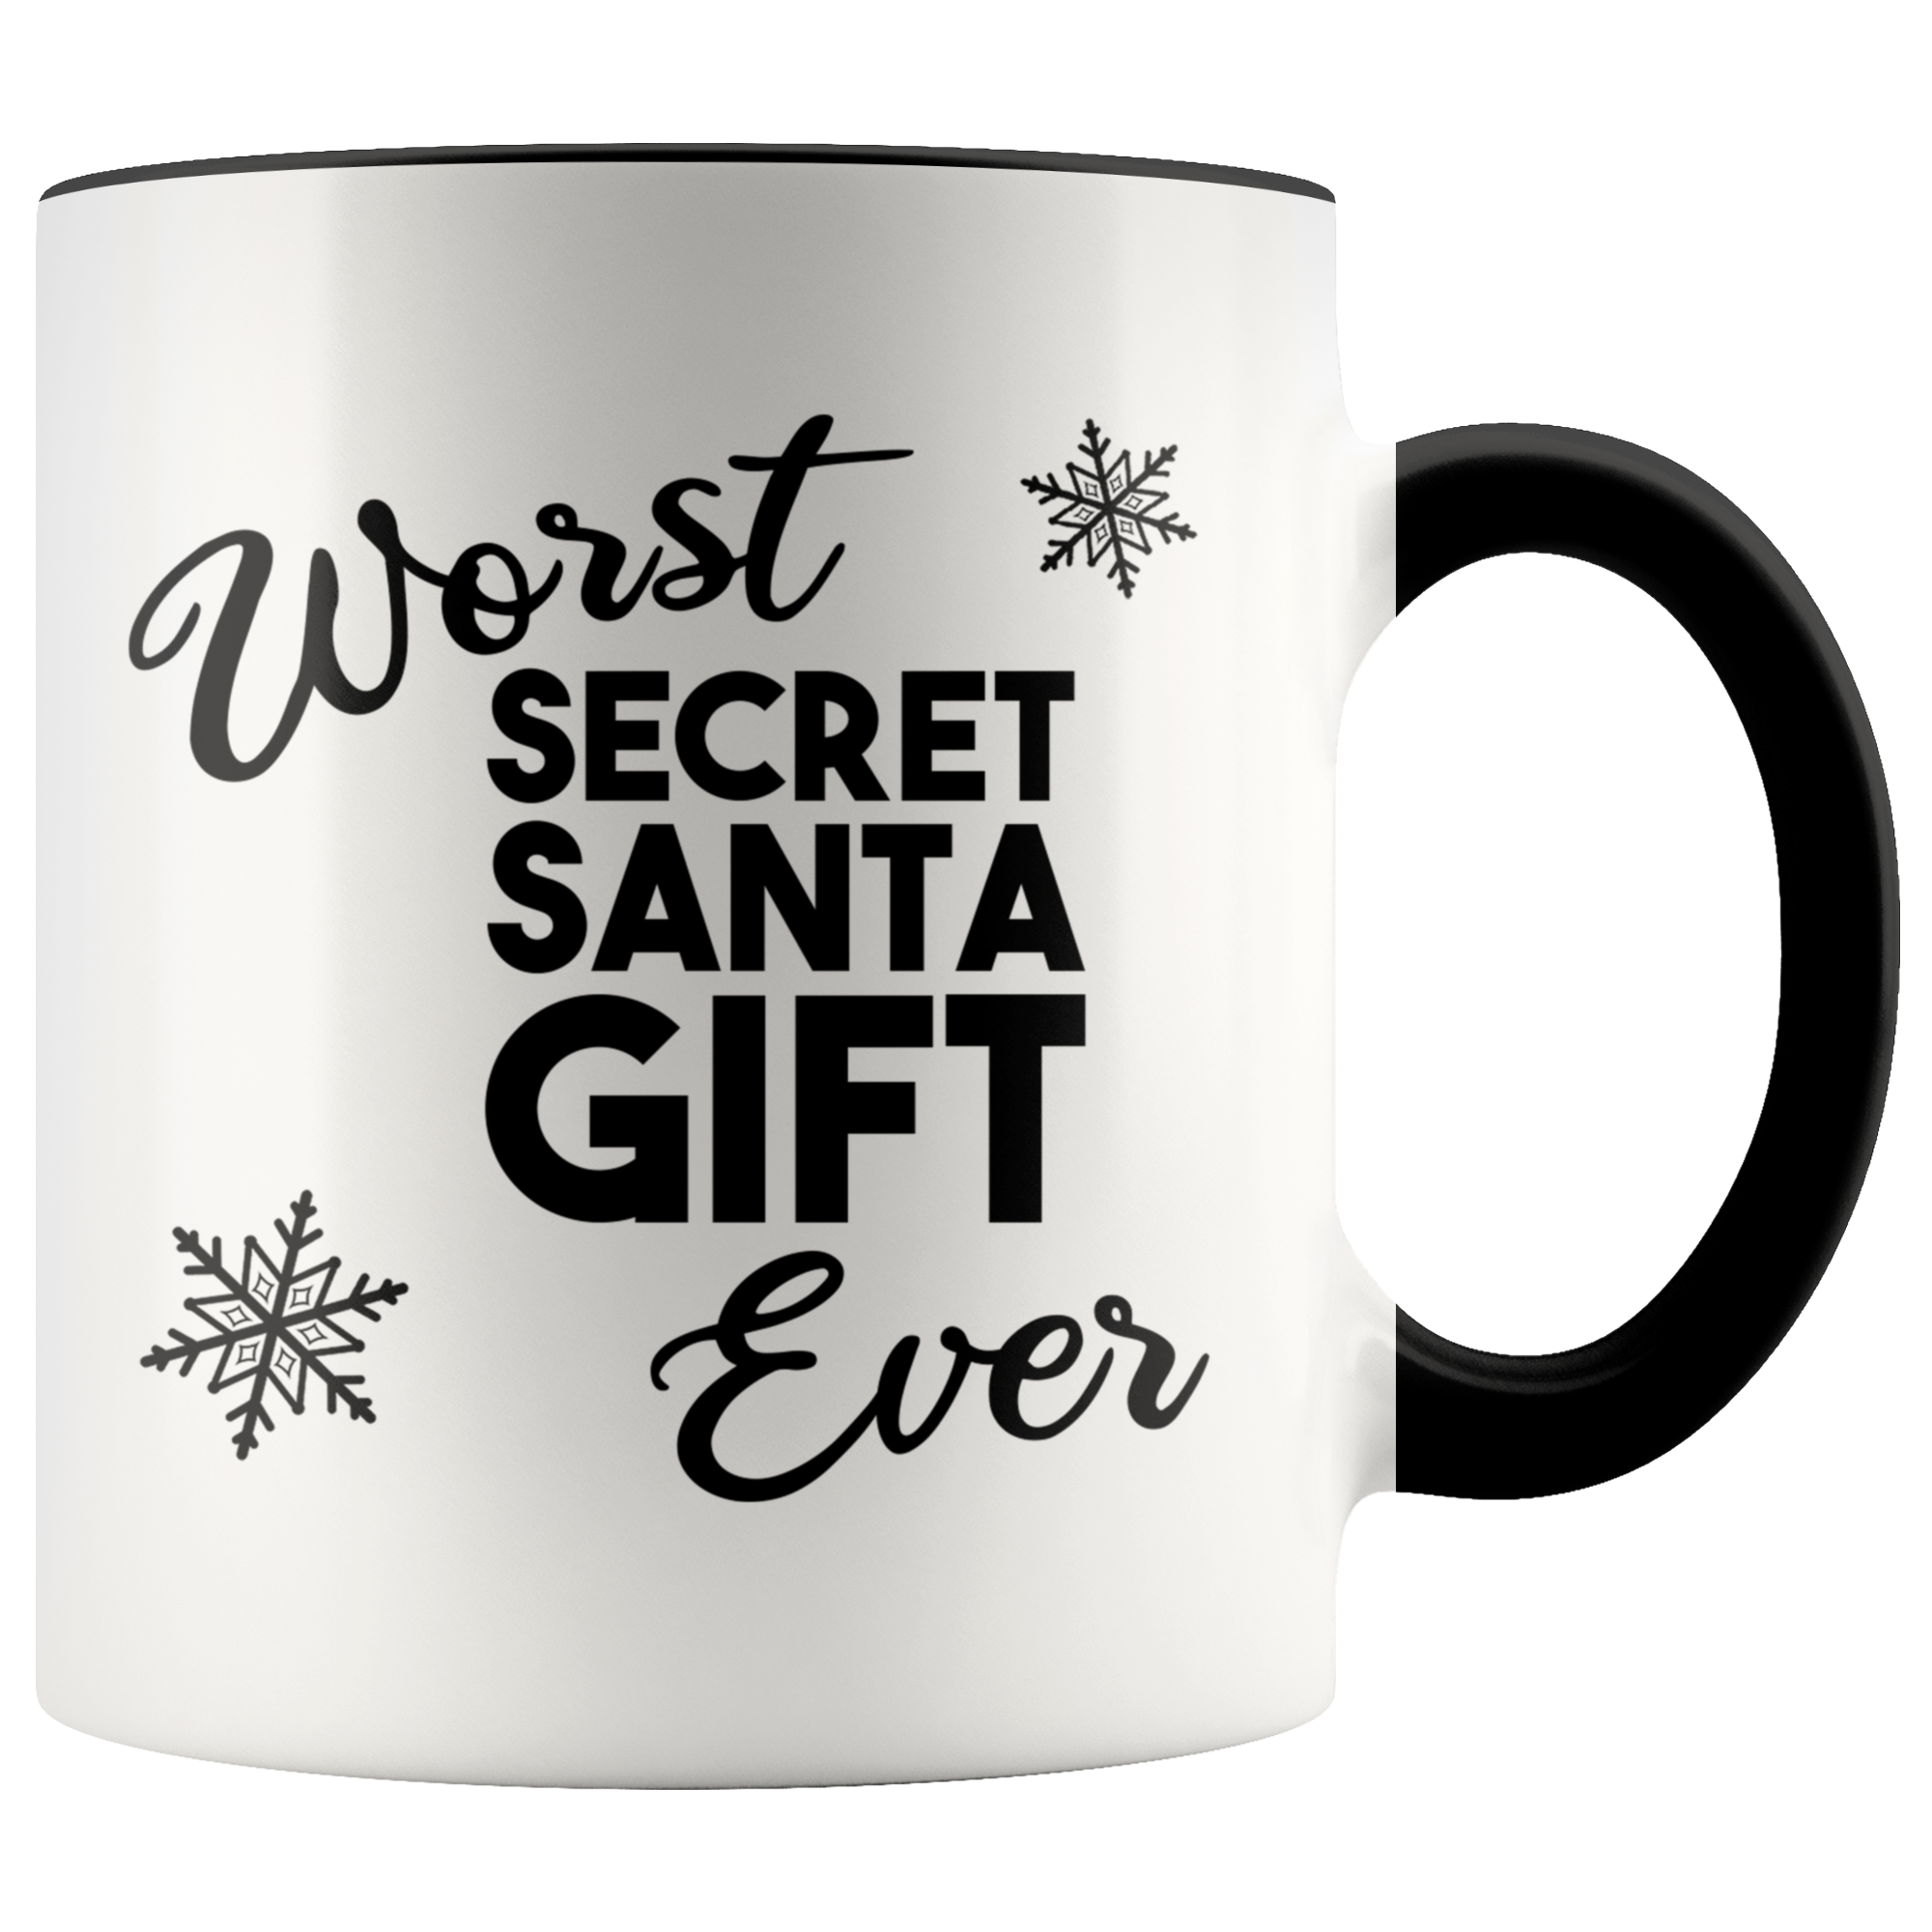 Well What Were You Expecting With a Secret Santa Budget of 10 Euros Mug 